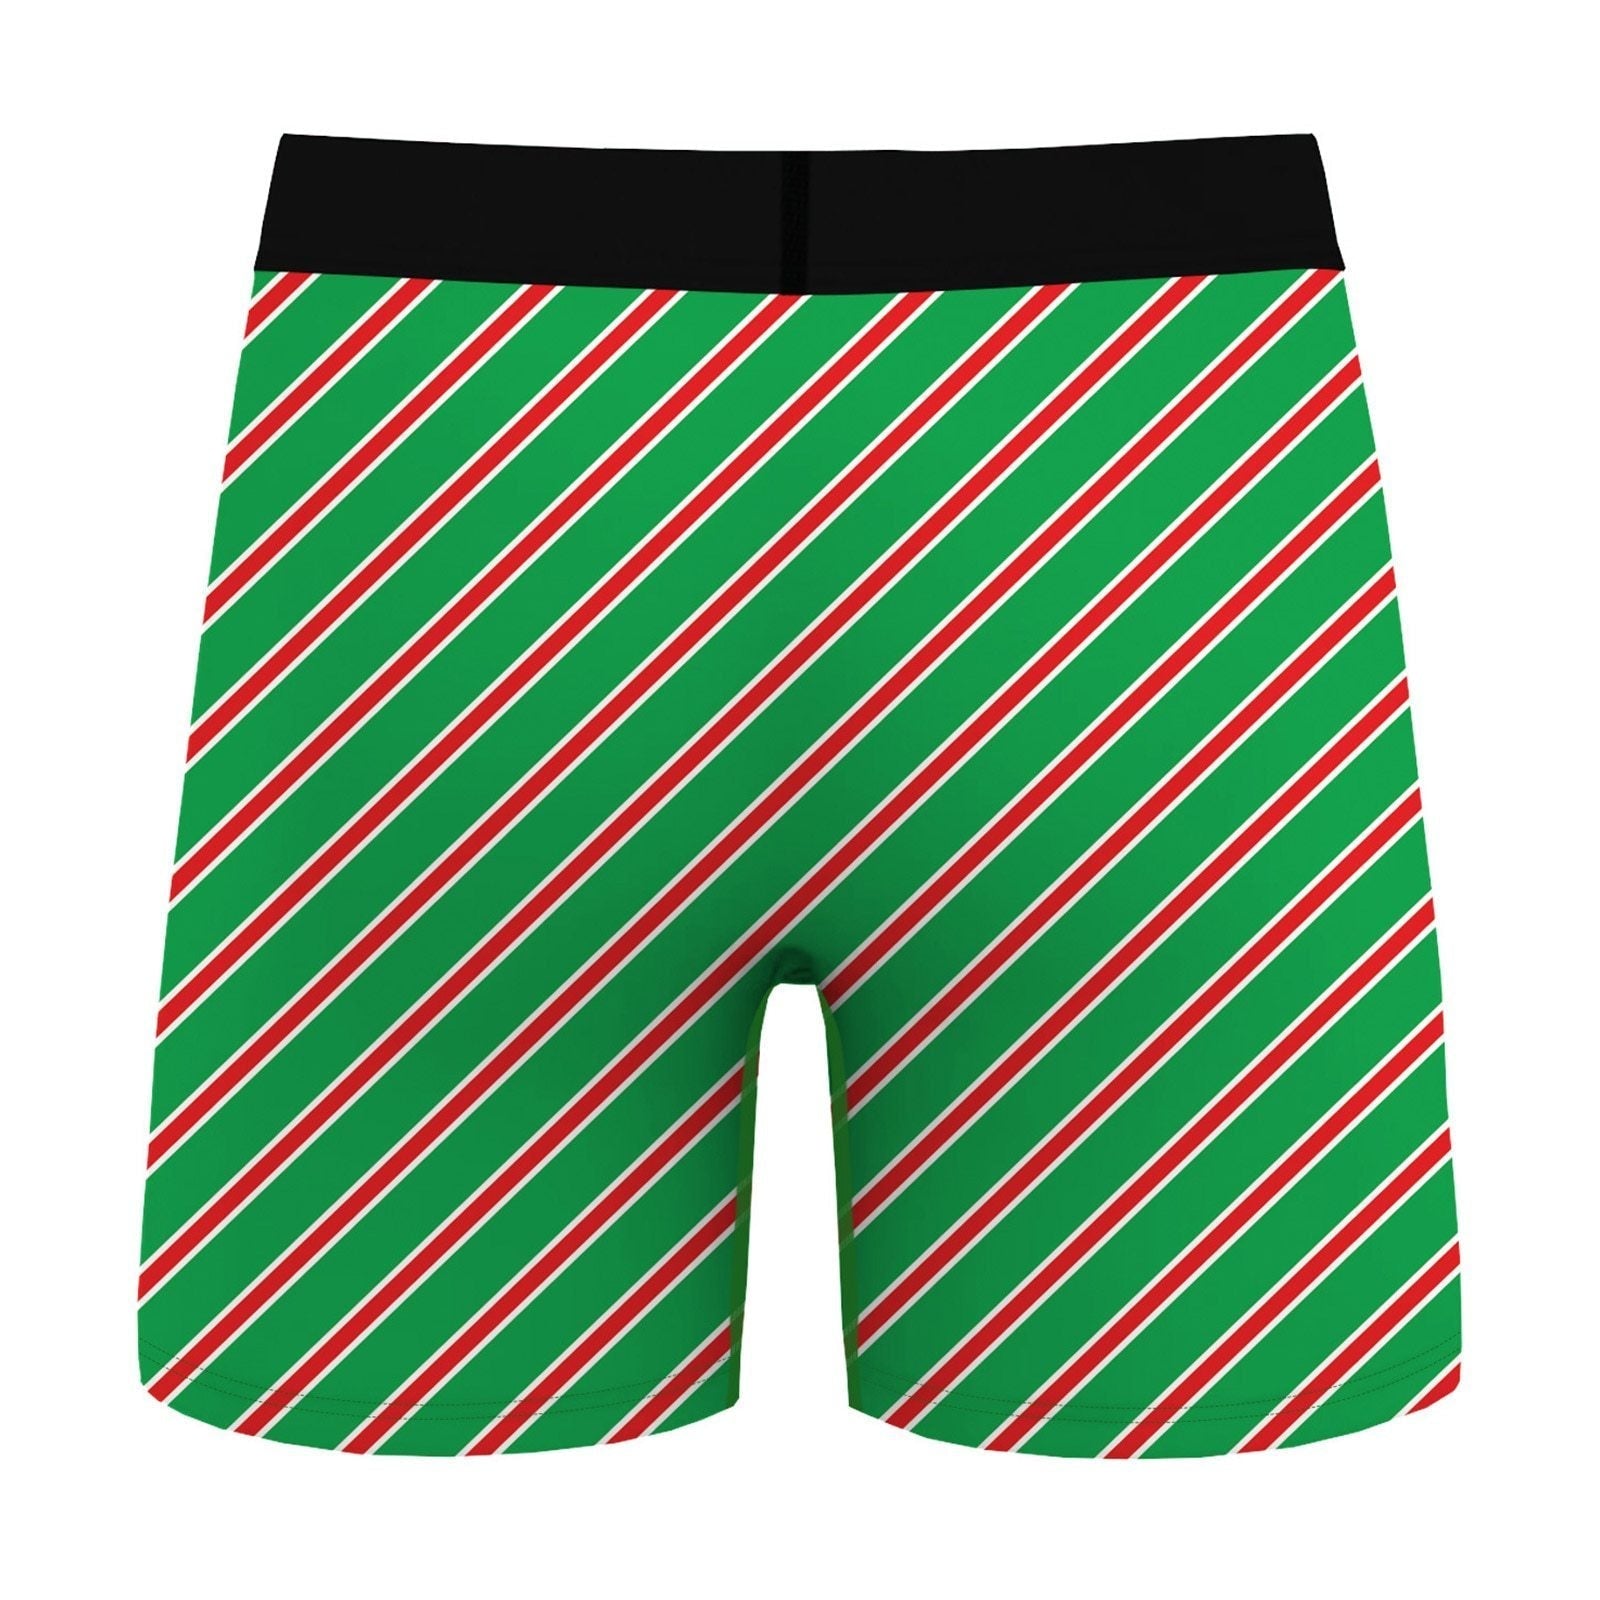 SALE - XMAS GIFT - Mens Christmas Diamond Printed Boxer Shorts with  Decorated Pouch Front Black and White